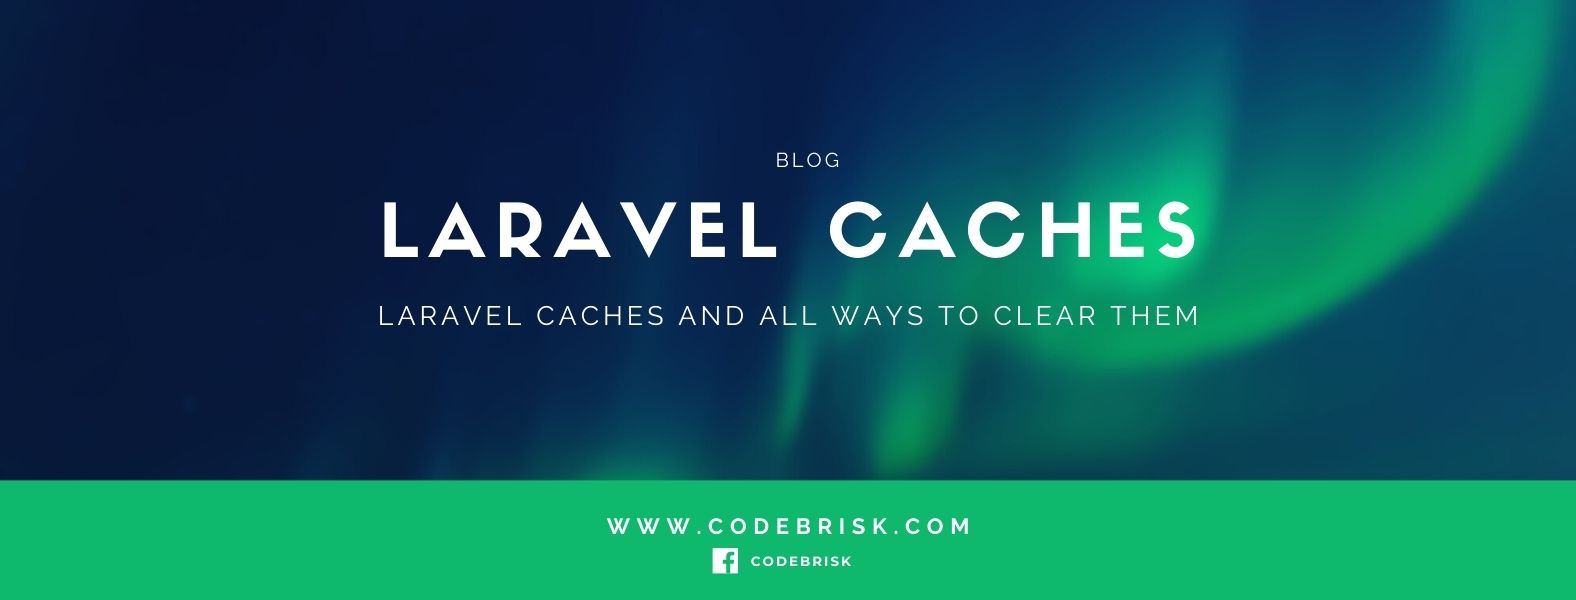 Laravel Caches And All Ways to Clear Them